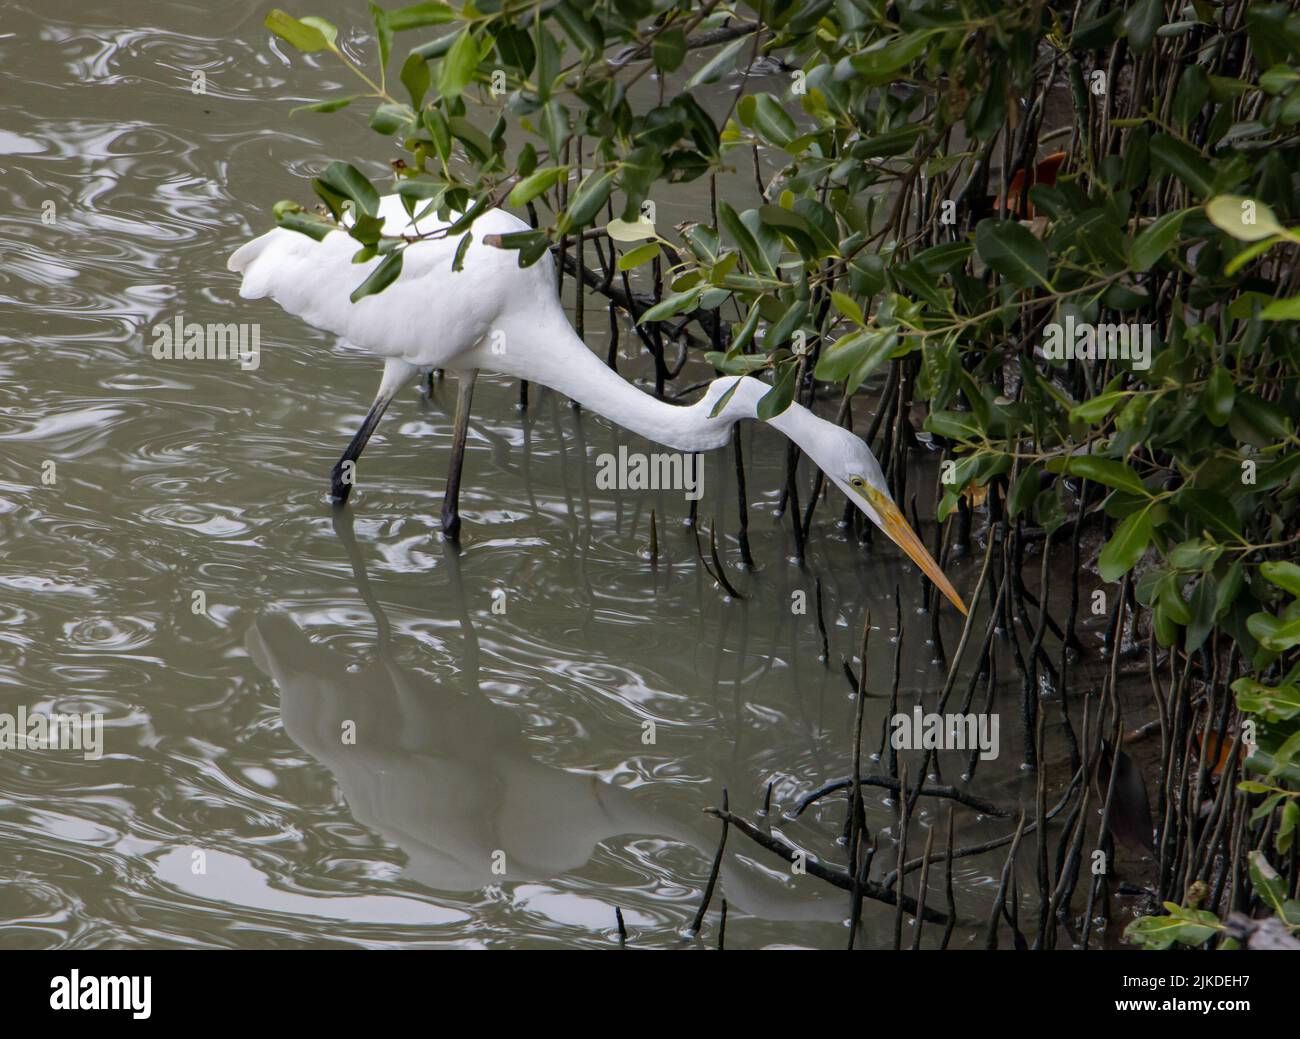 The great egret (Ardea alba) wading in water shore, Thailand. Stock Photo